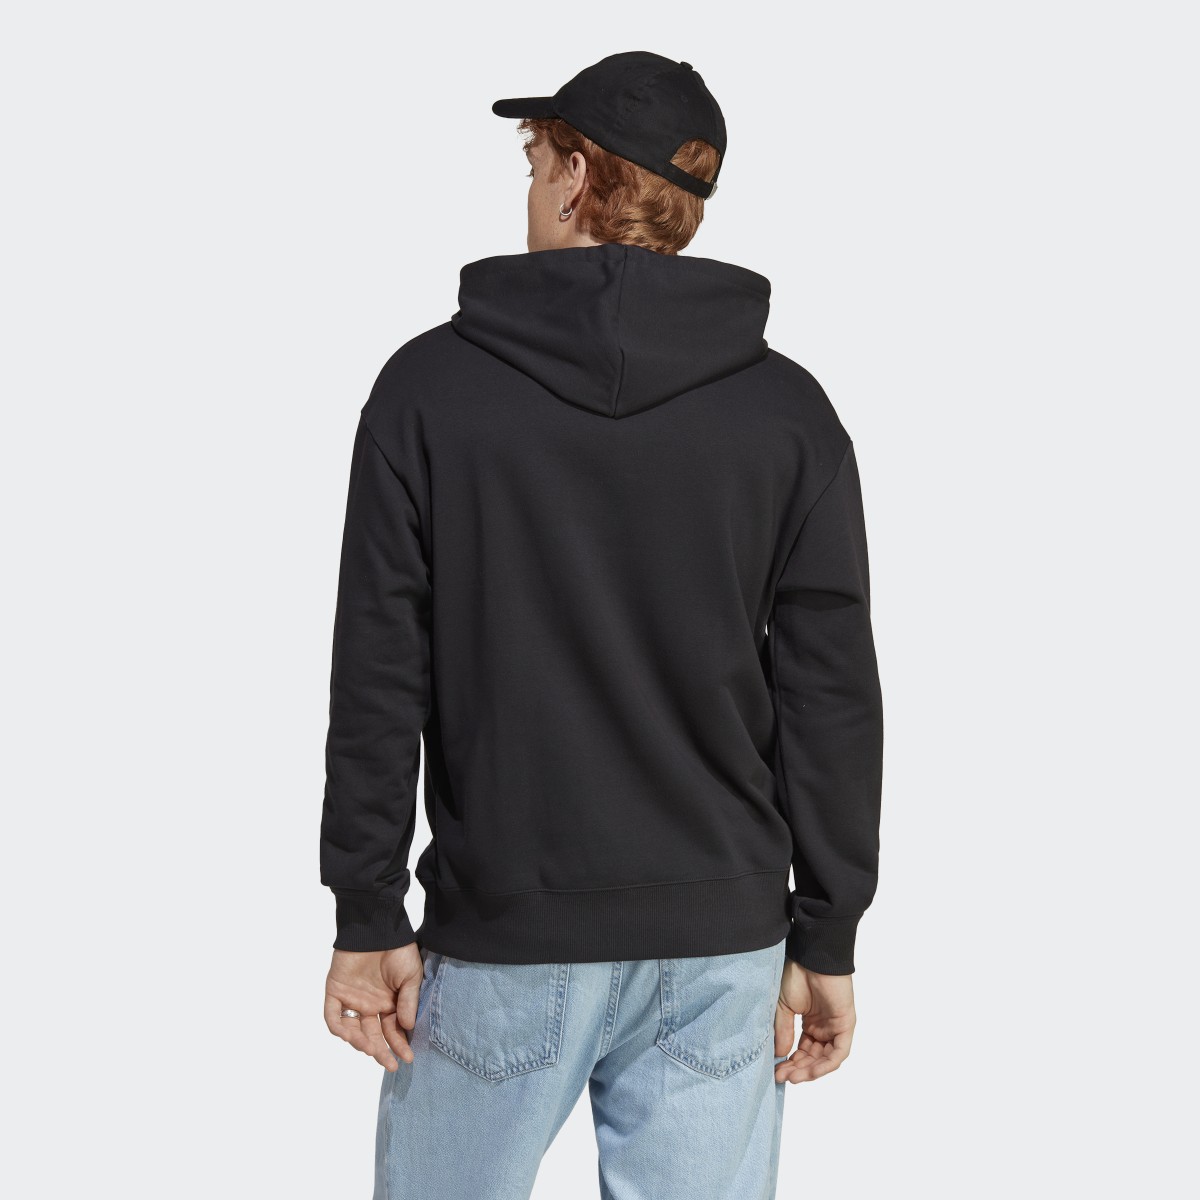 Adidas ALL SZN French Terry Hoodie. 4